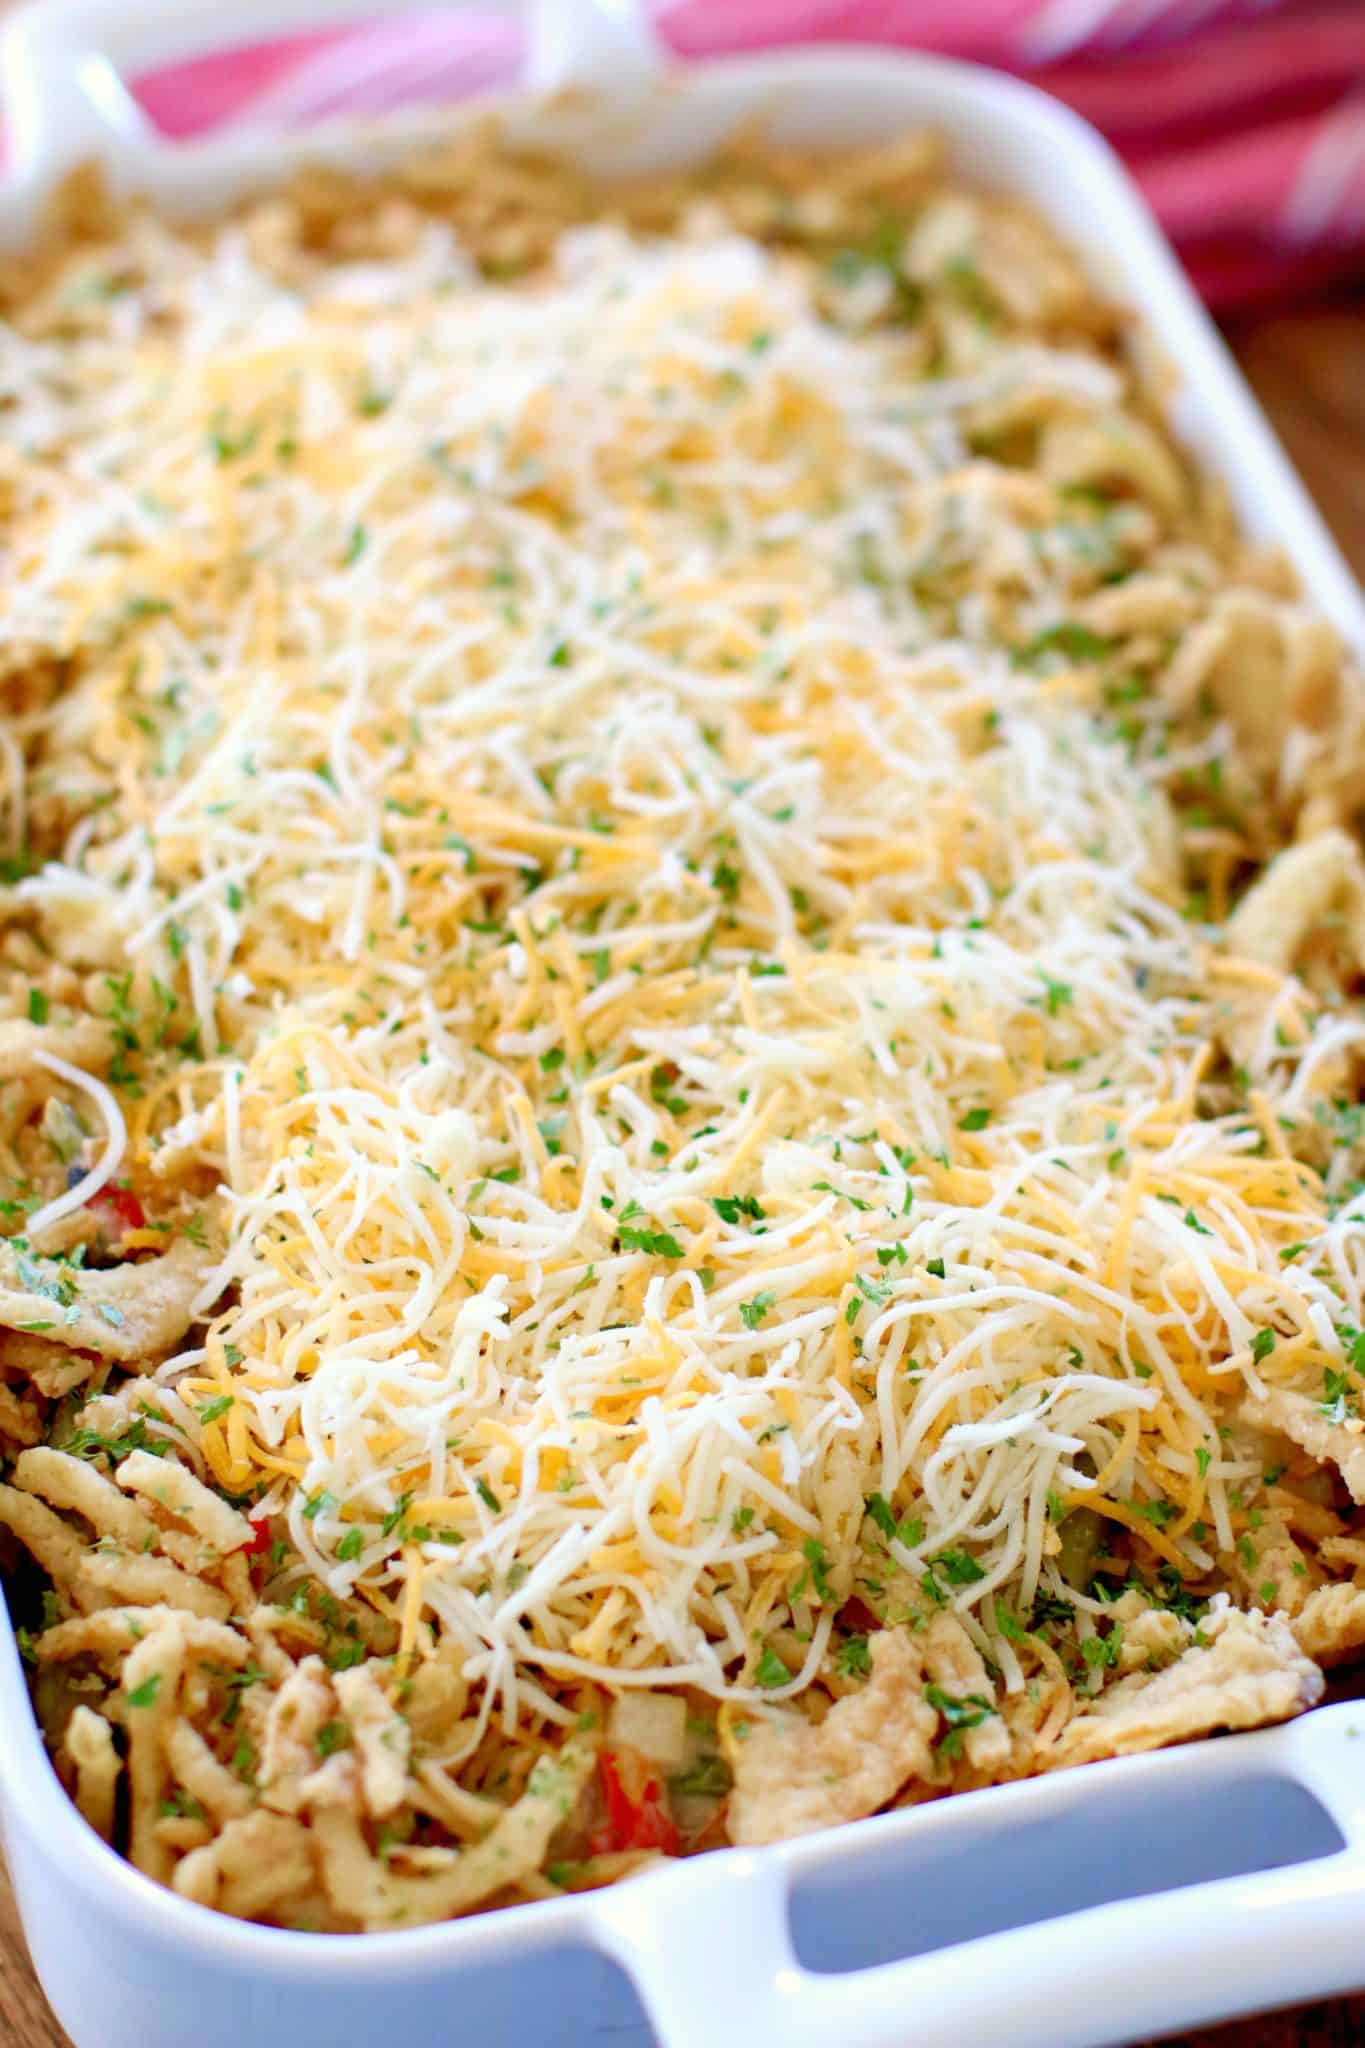 shredded cheese and crispy fried onions on top of green bean casserole mixture in baking dish.